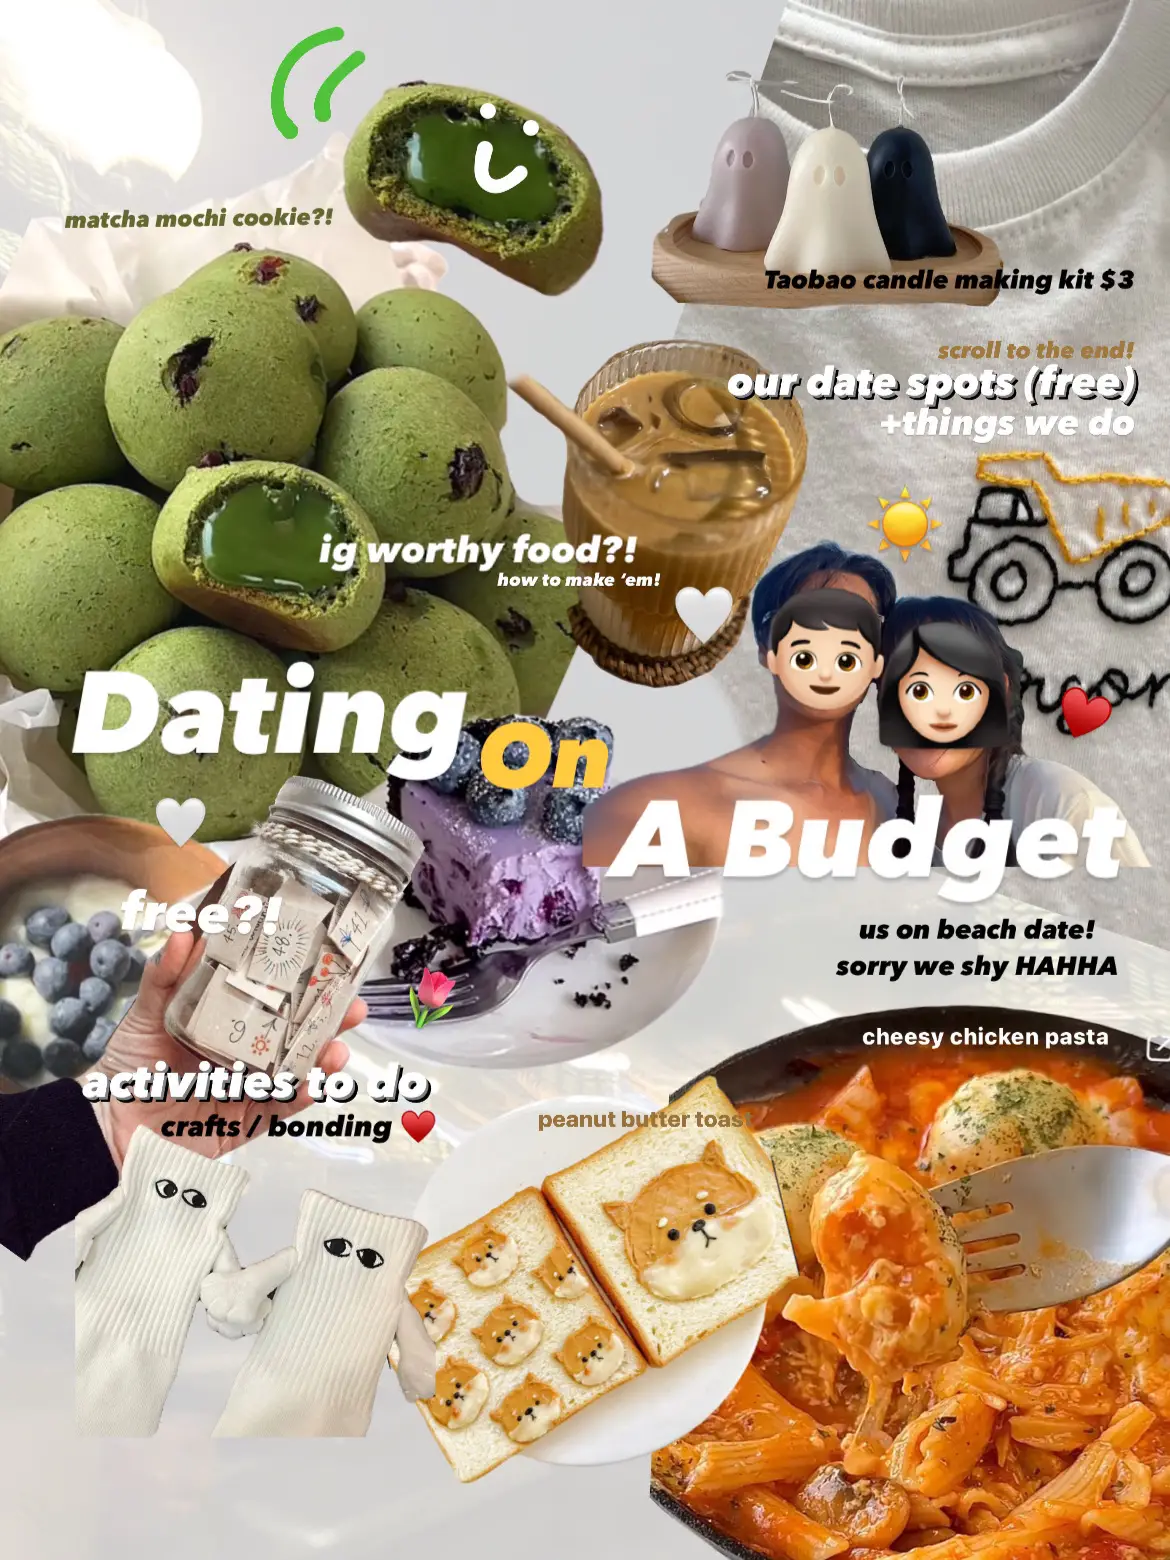 budget dates (FREE activities + aesthetic) 's images